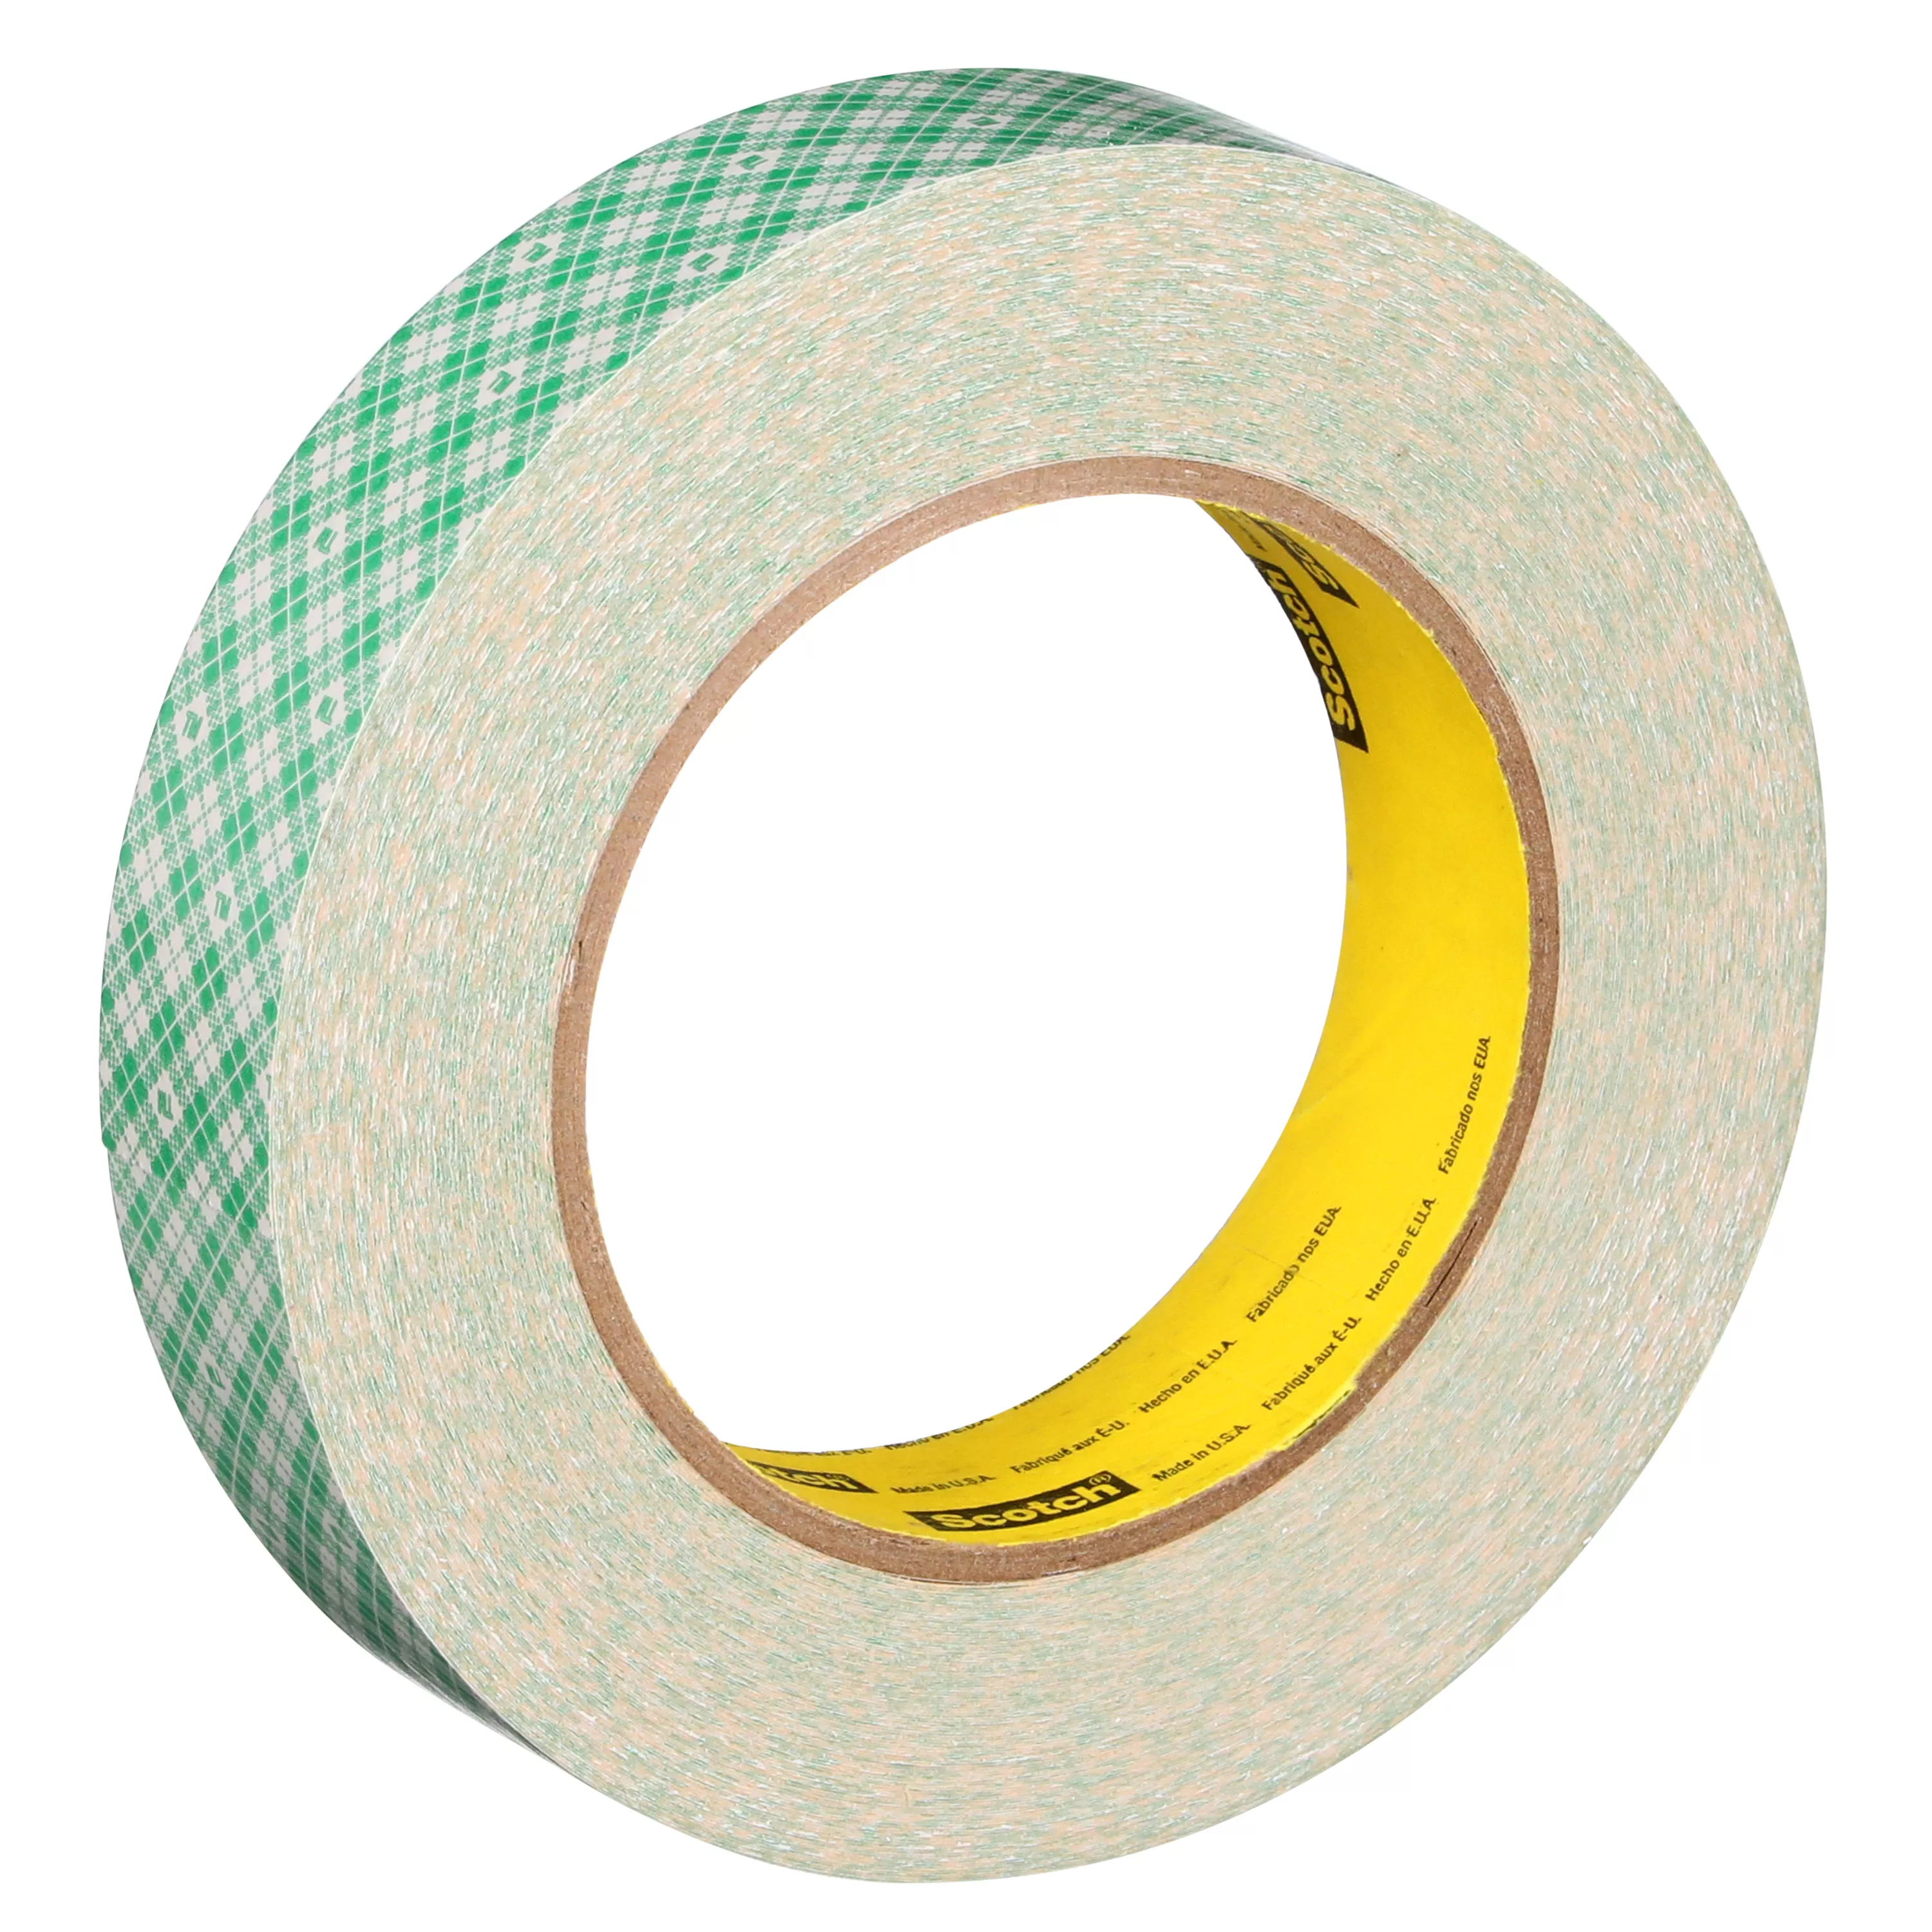 SKU 7000049274 | 3M™ Double Coated Paper Tape 410M